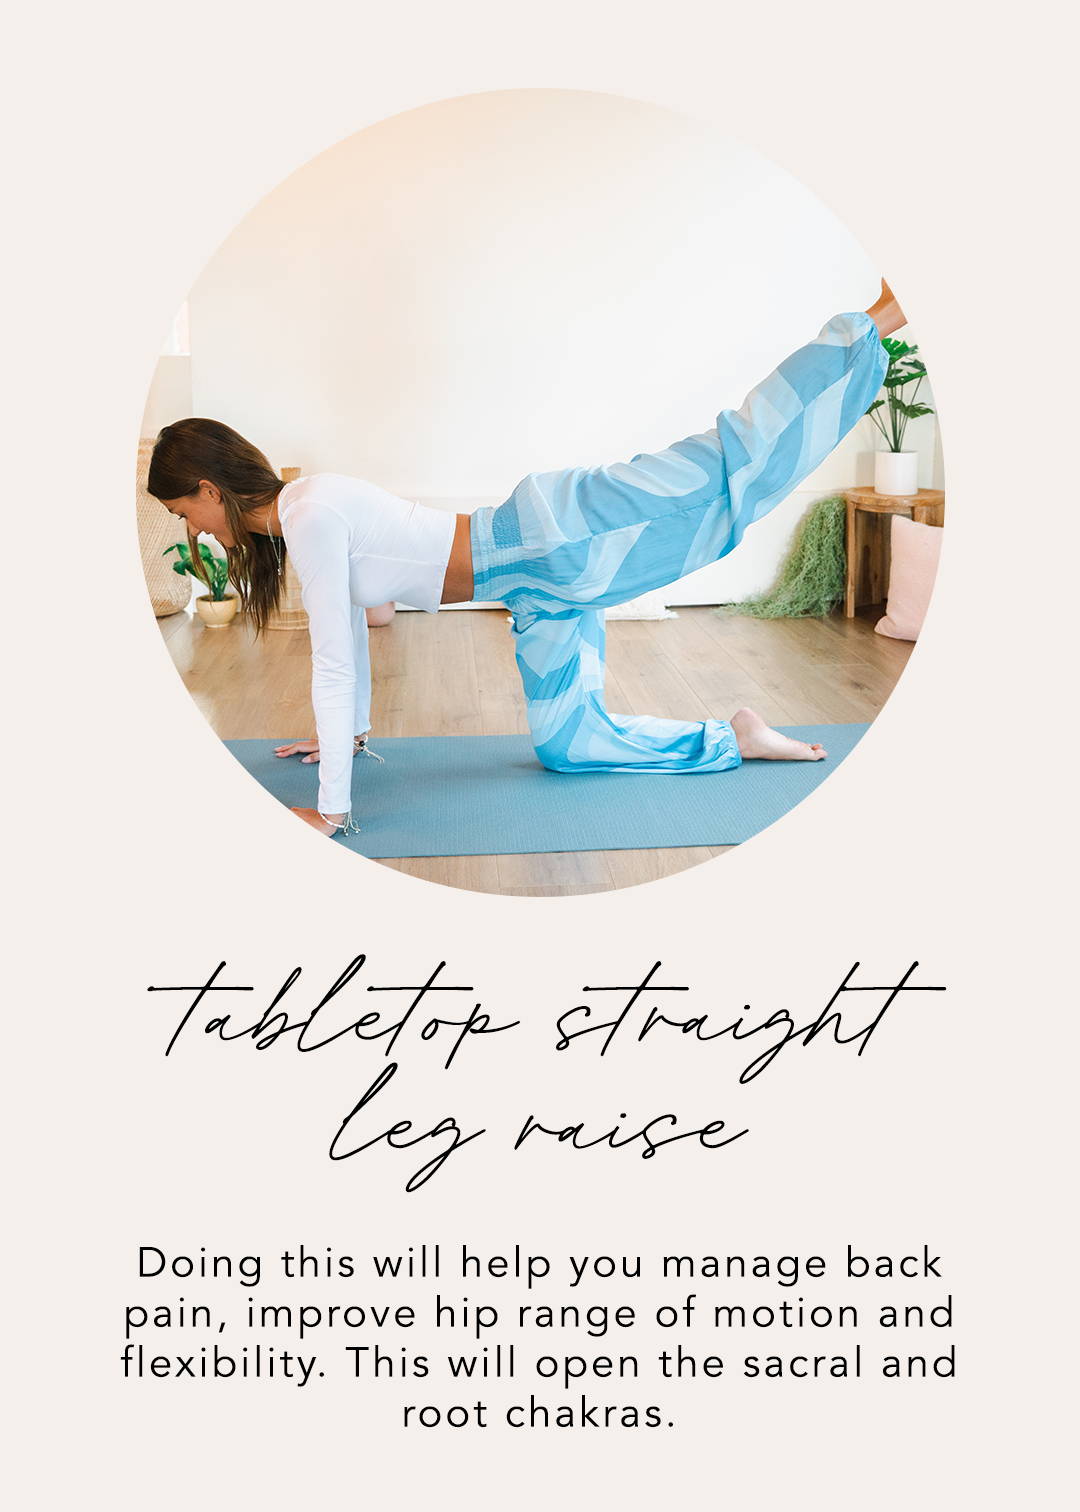 Tabletop Straight Leg Raise: Doing this will help you manage back pain, improve hip range of motion and flexibility. This will open the sacral and root chakras.